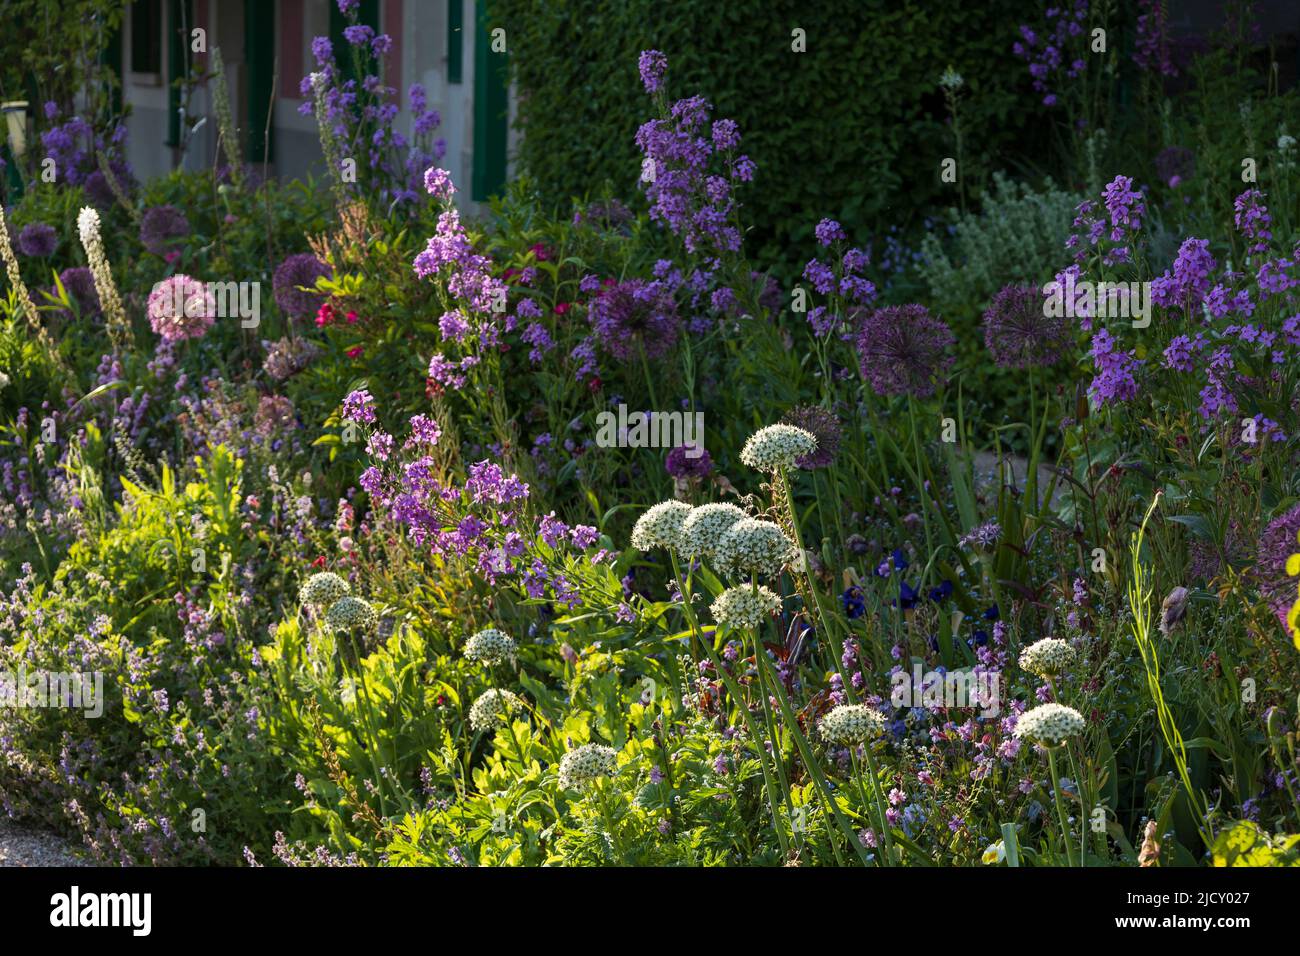 Monet's garden in Giverny, Normandy, France Stock Photo